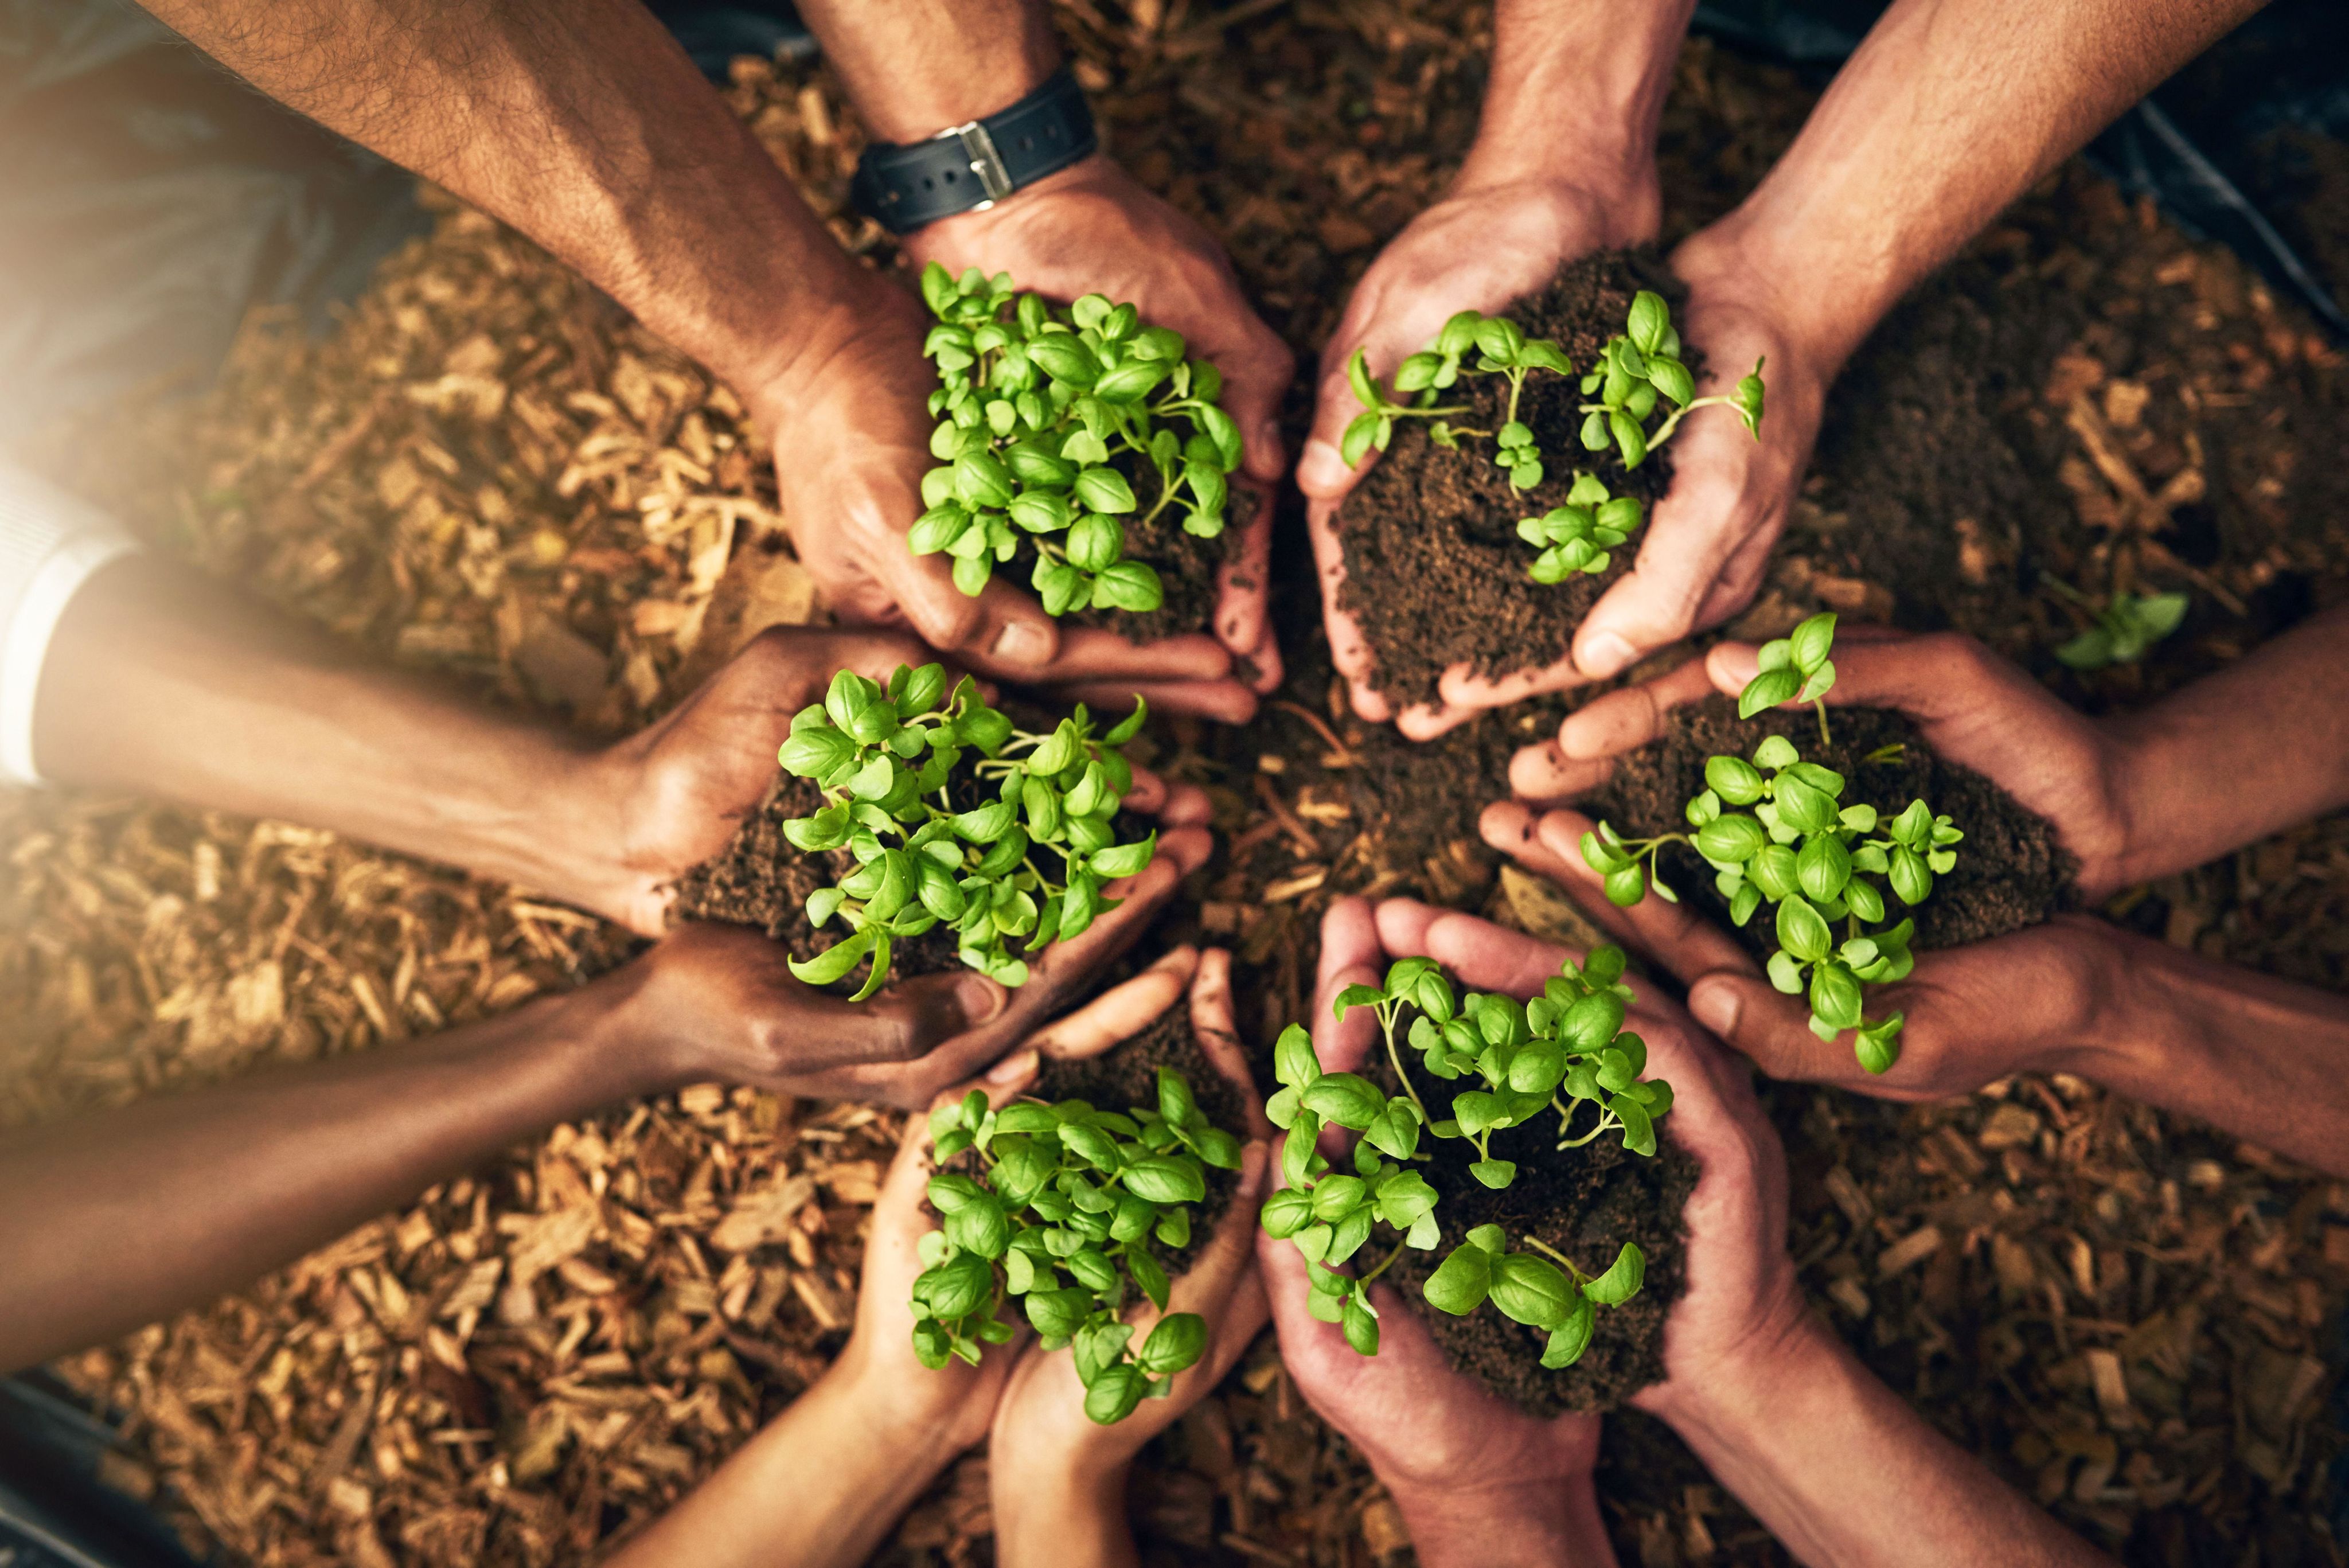 An image of hands holding sprouting plants and soil